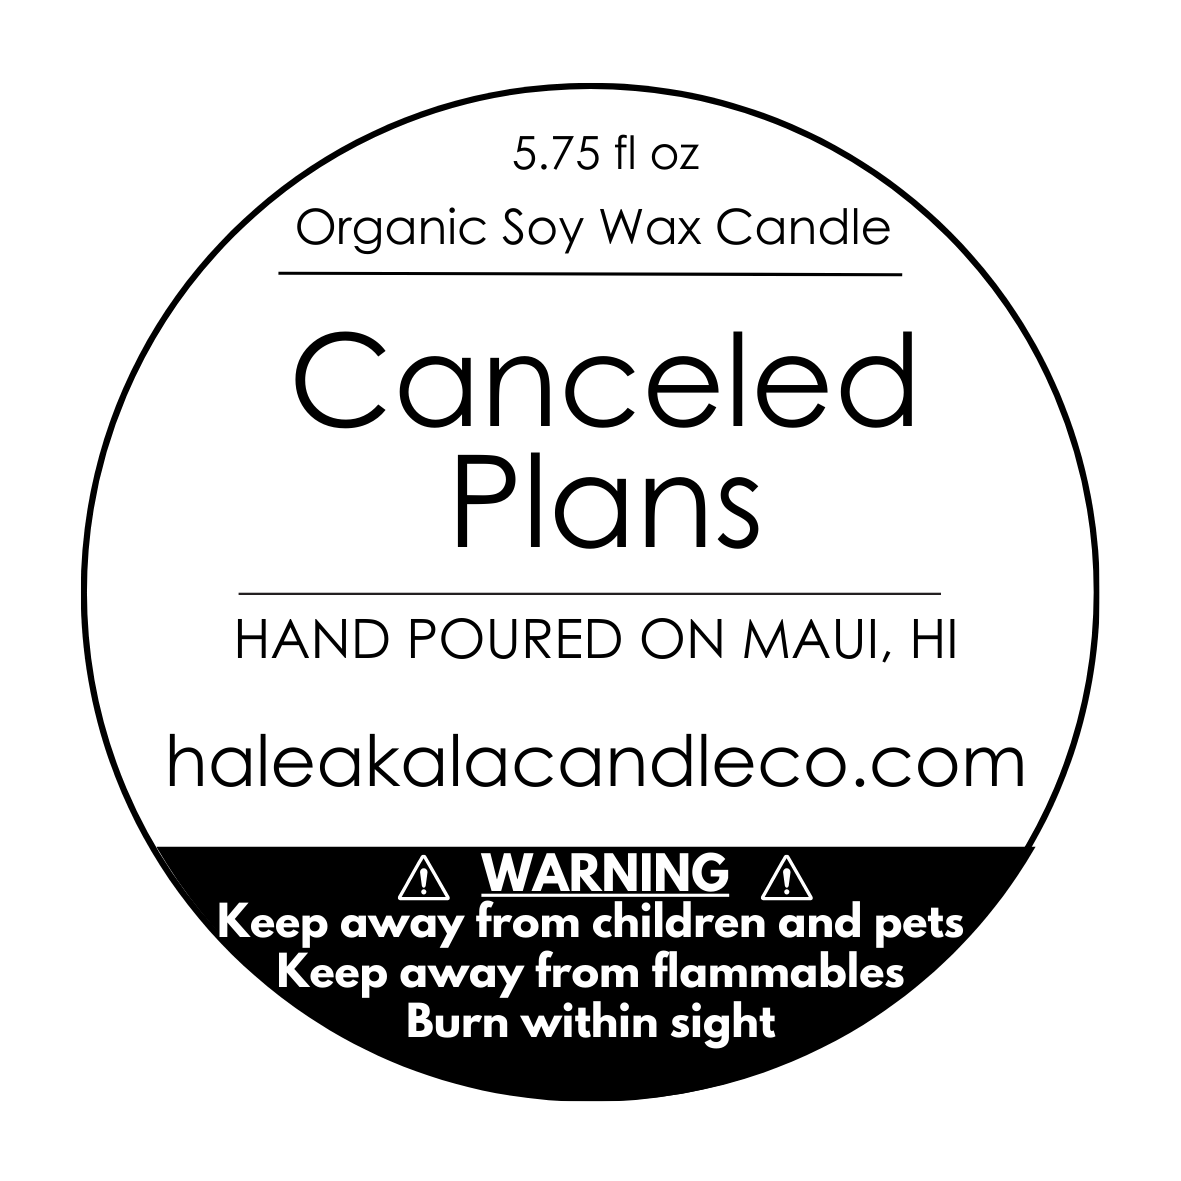 'Canceled Plans'  Organic Soy Wax Candle